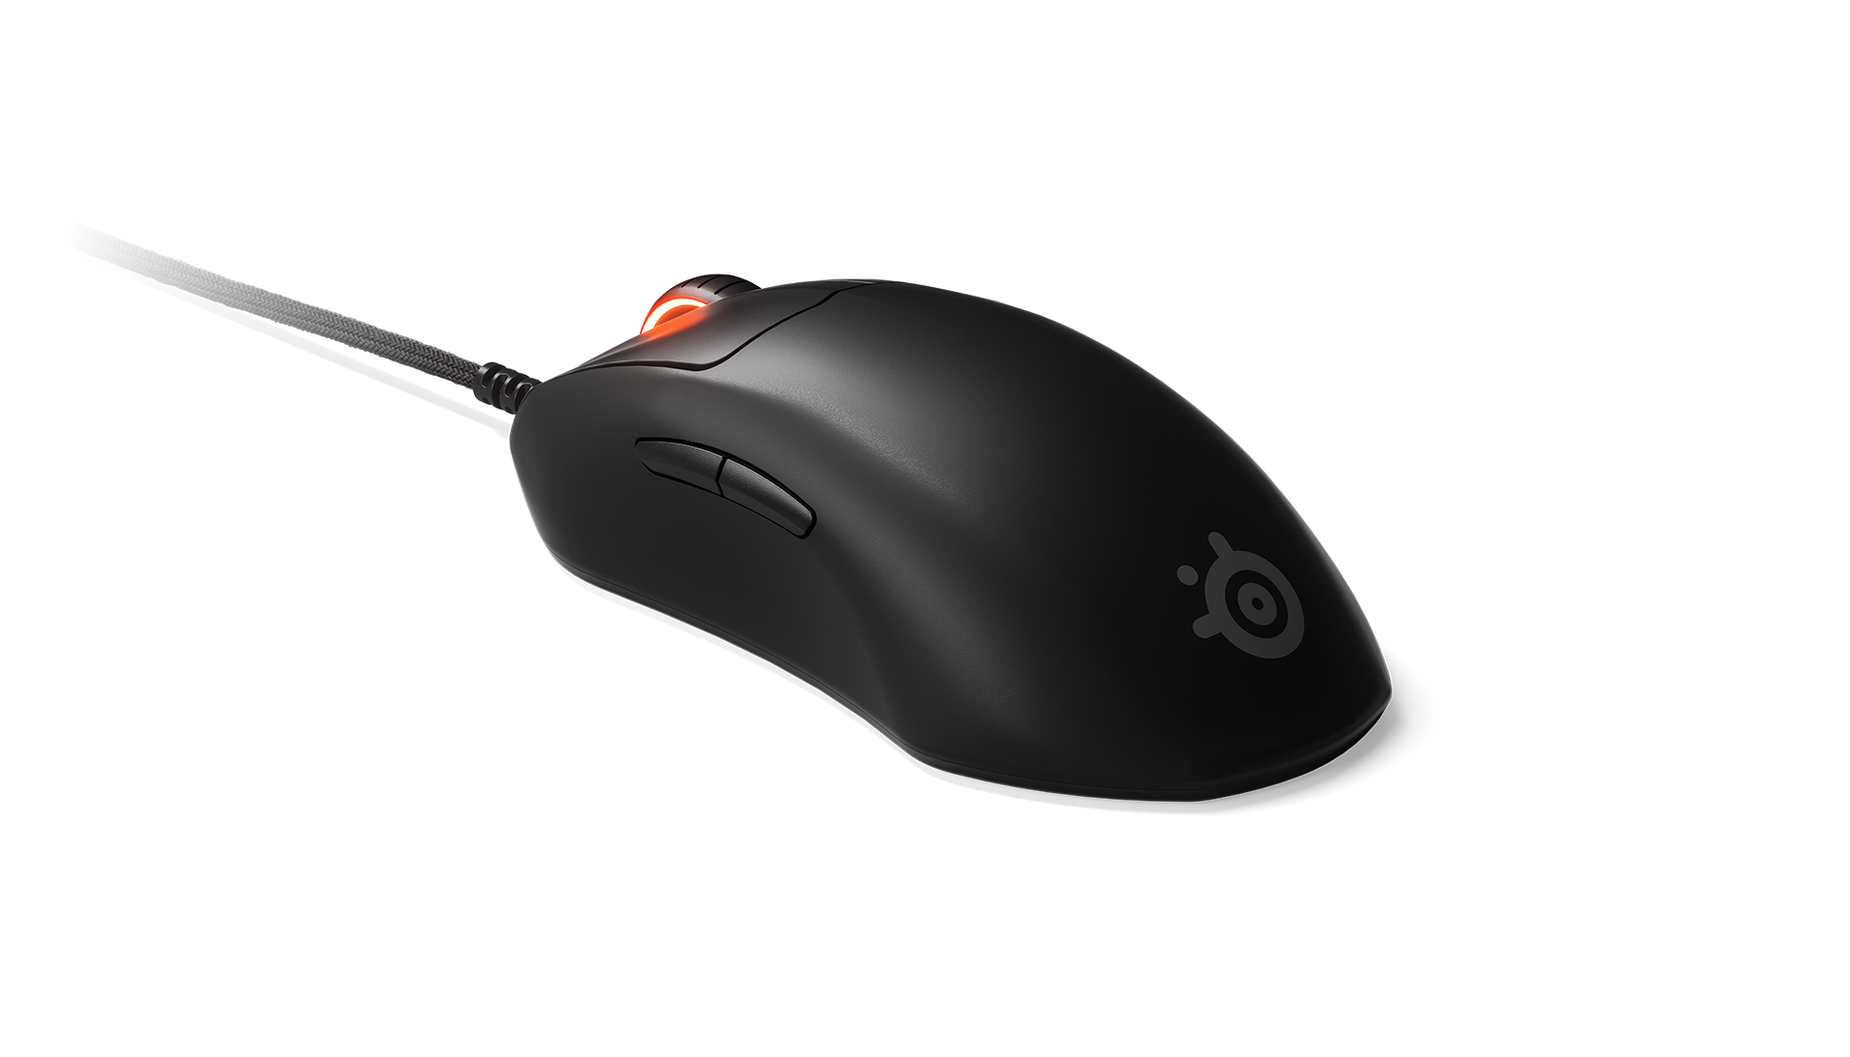 
 An angled view of the Prime mouse.
 